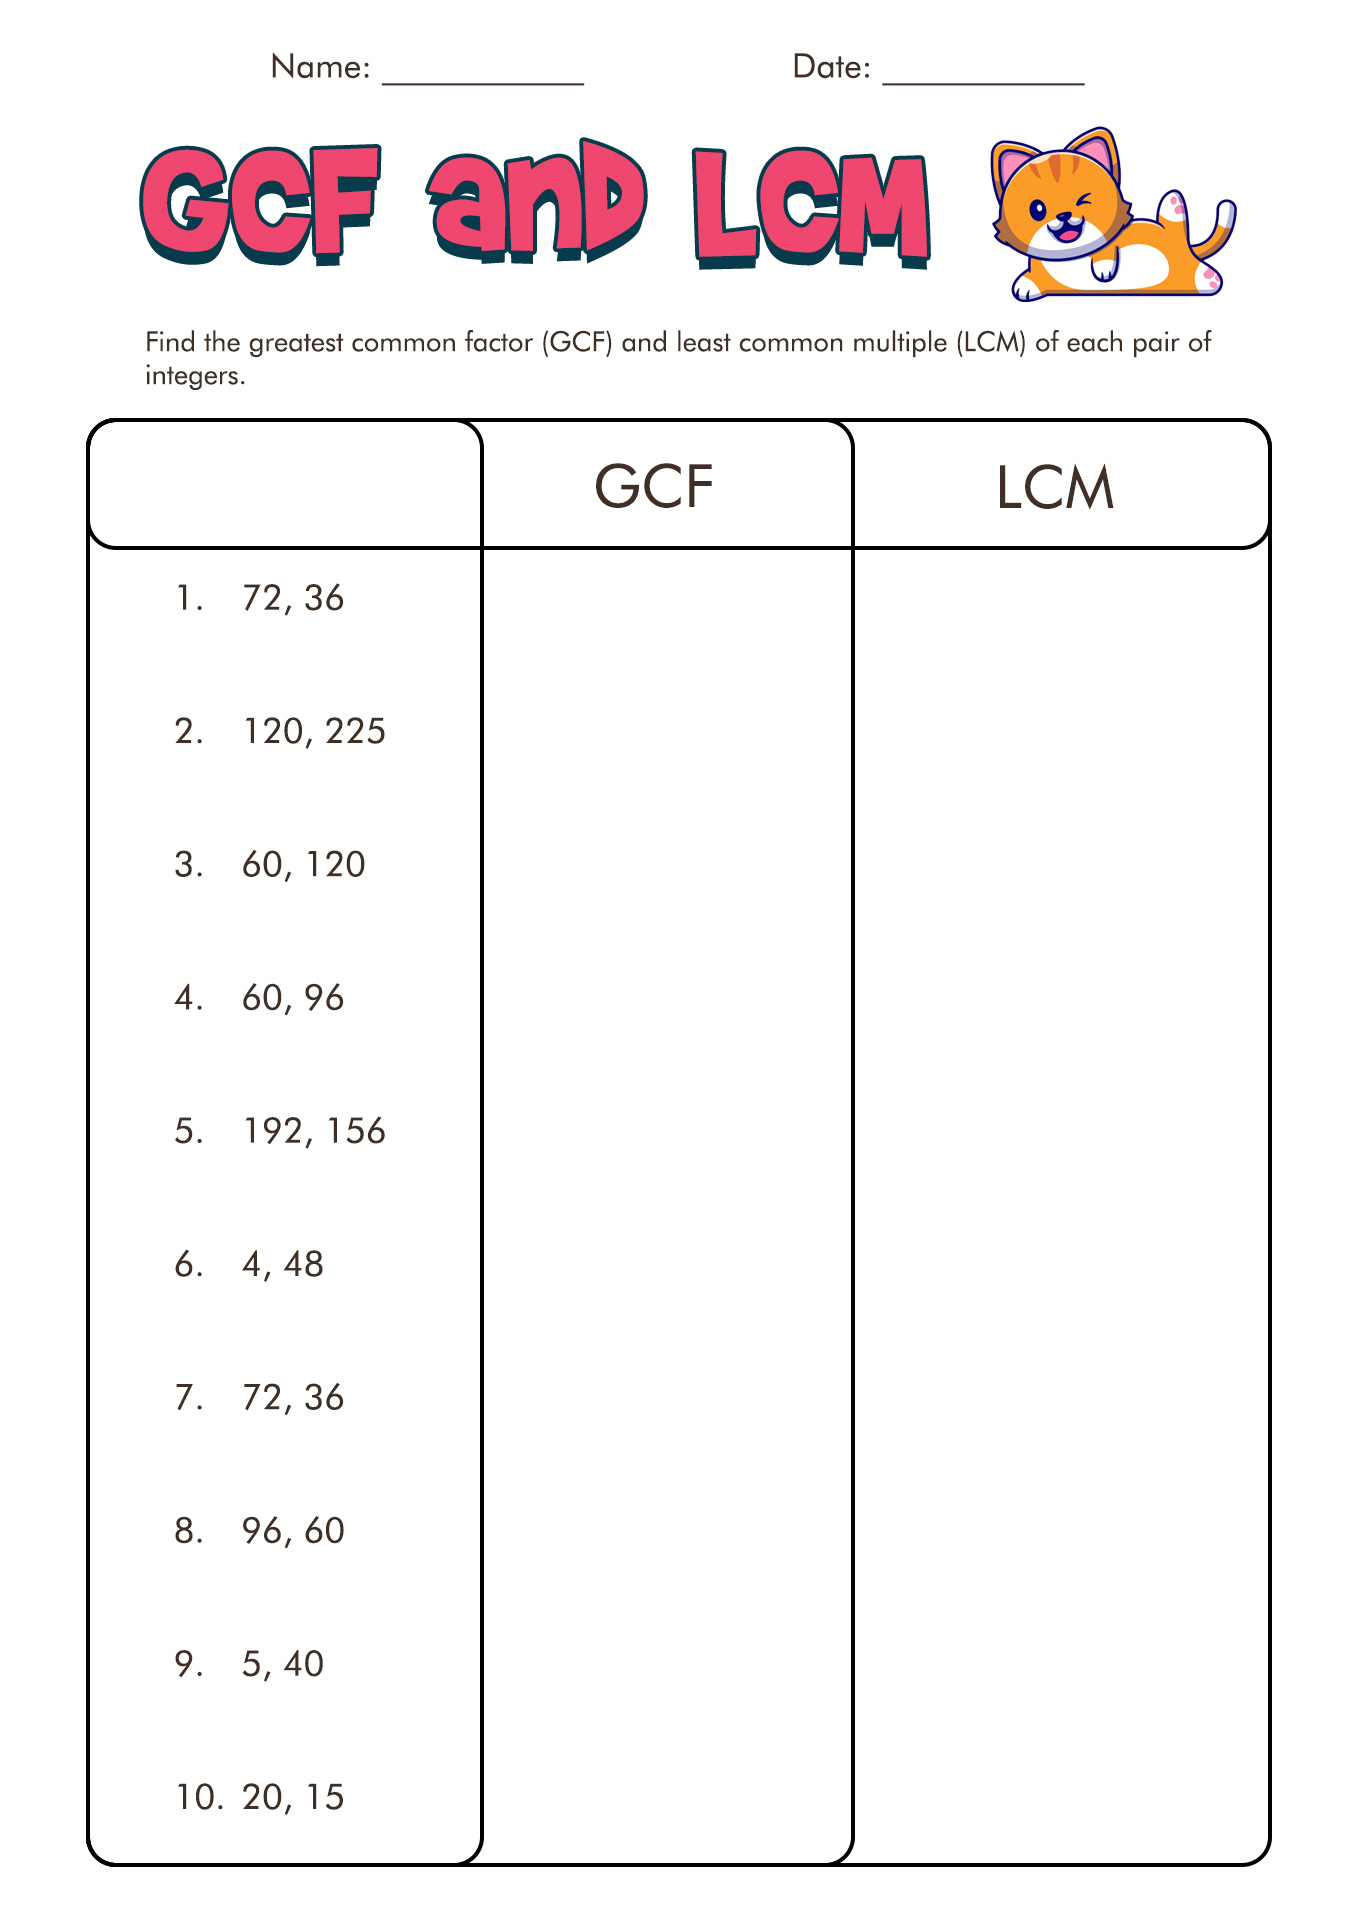 GCF and LCM Worksheets Image